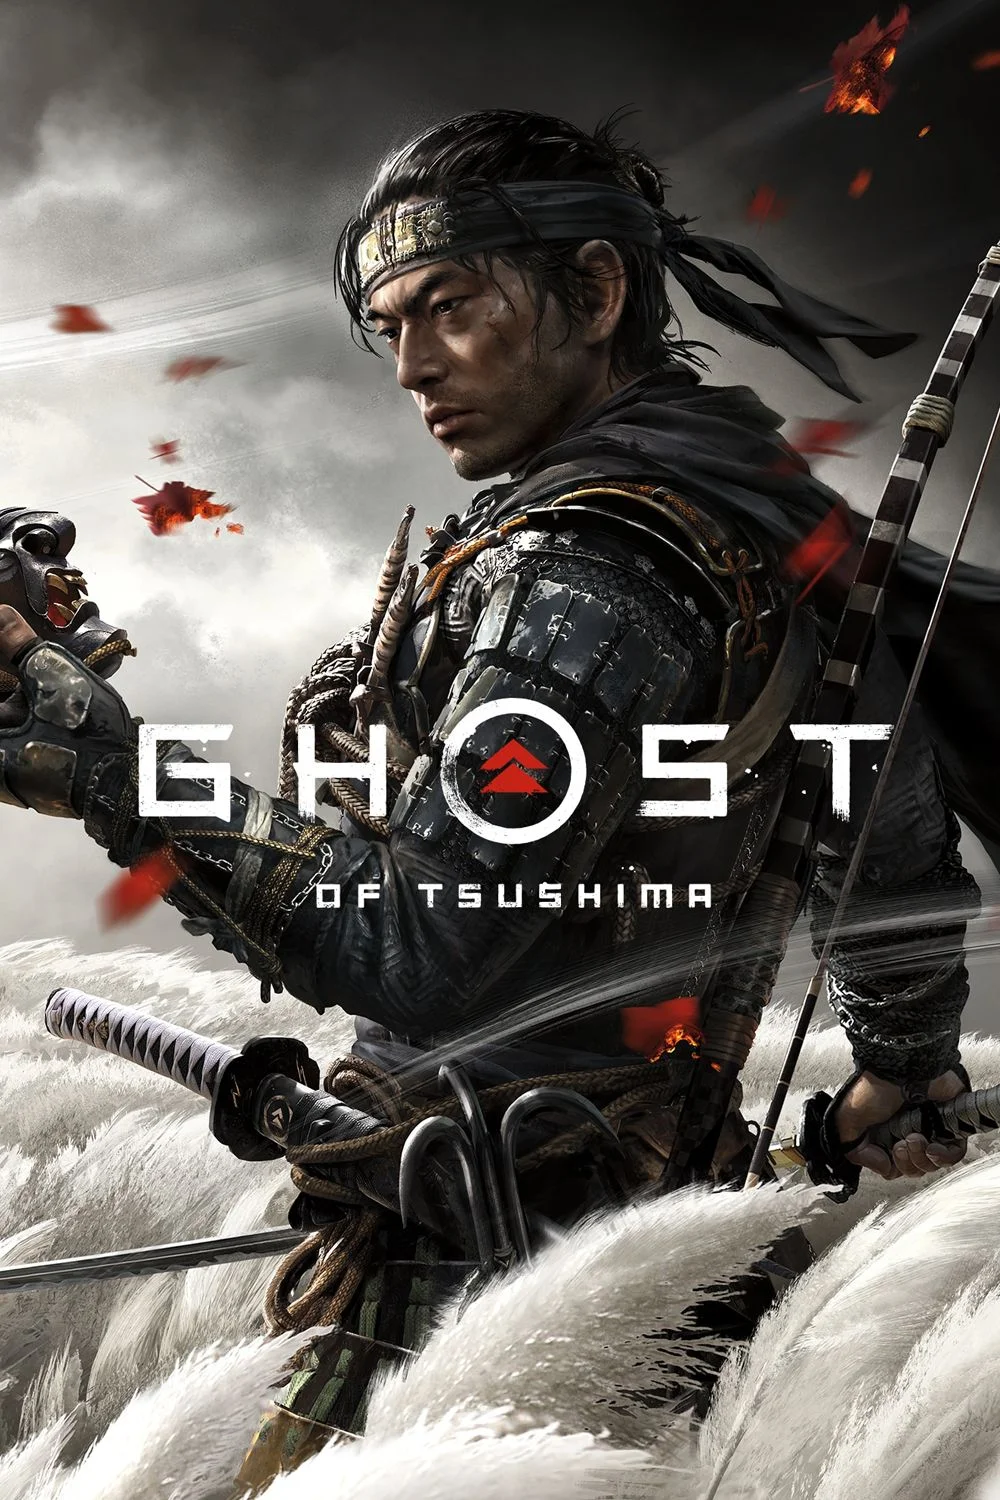 Exploring the Past in Ghost of Tsushima 2: Potential Prequel Paths and Historical Settings